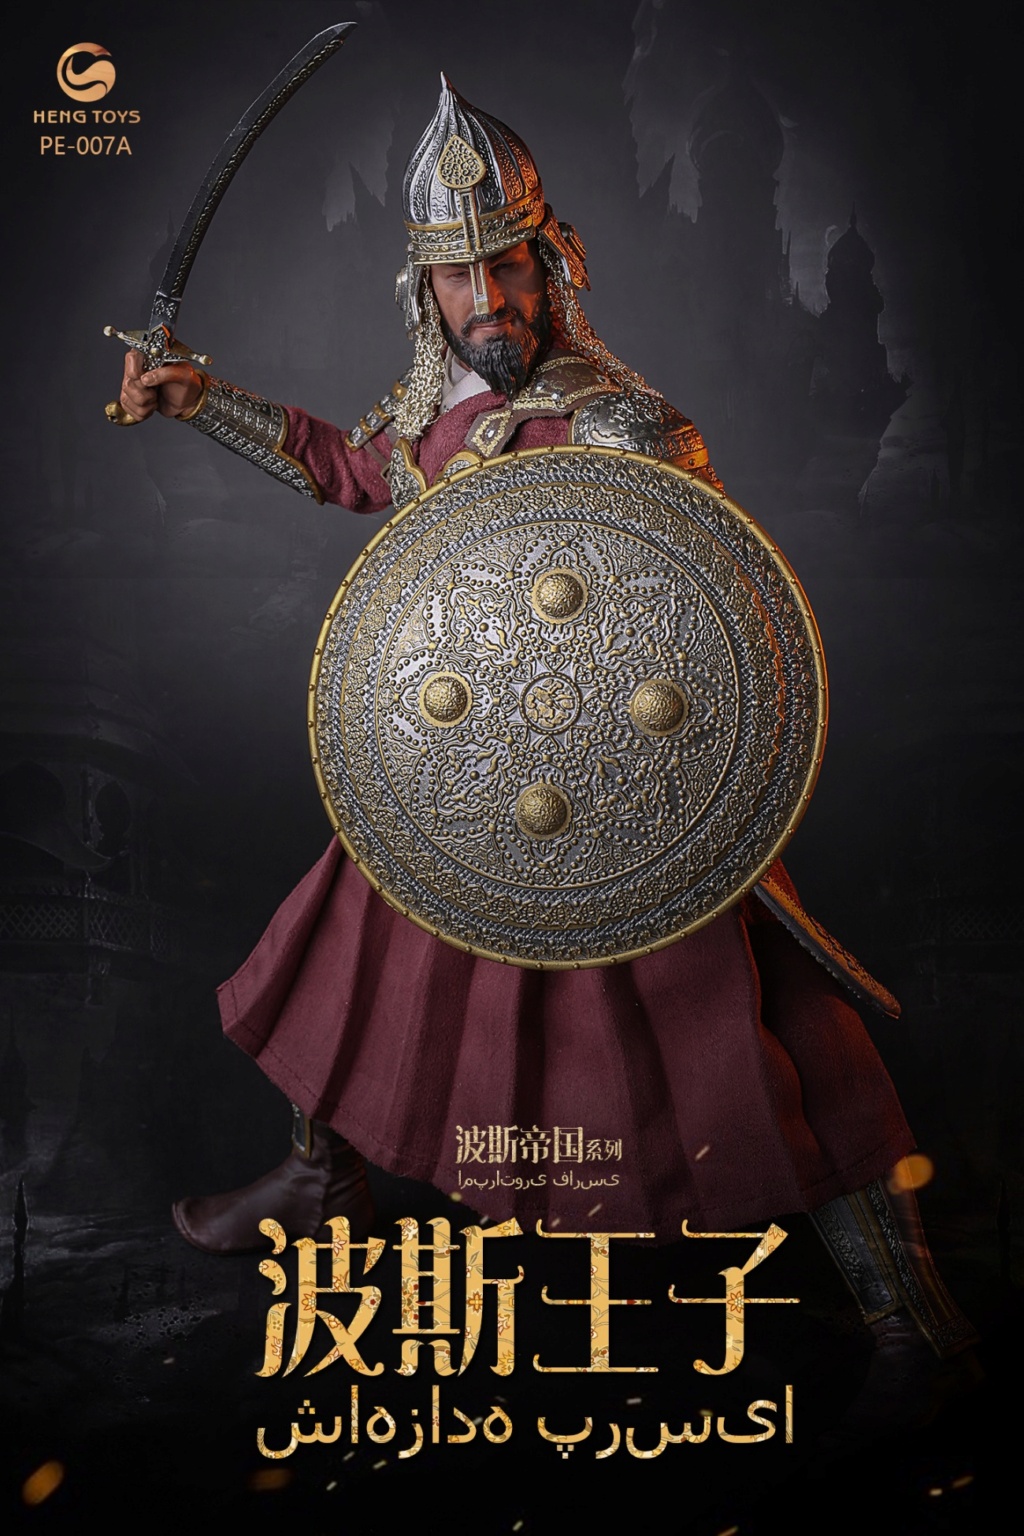 PersianEmpire - NEW PRODUCT: HengToys: 1/6 Persian Empire Series-Prince of Persia [A & B Section] (#PE-007) 16032811